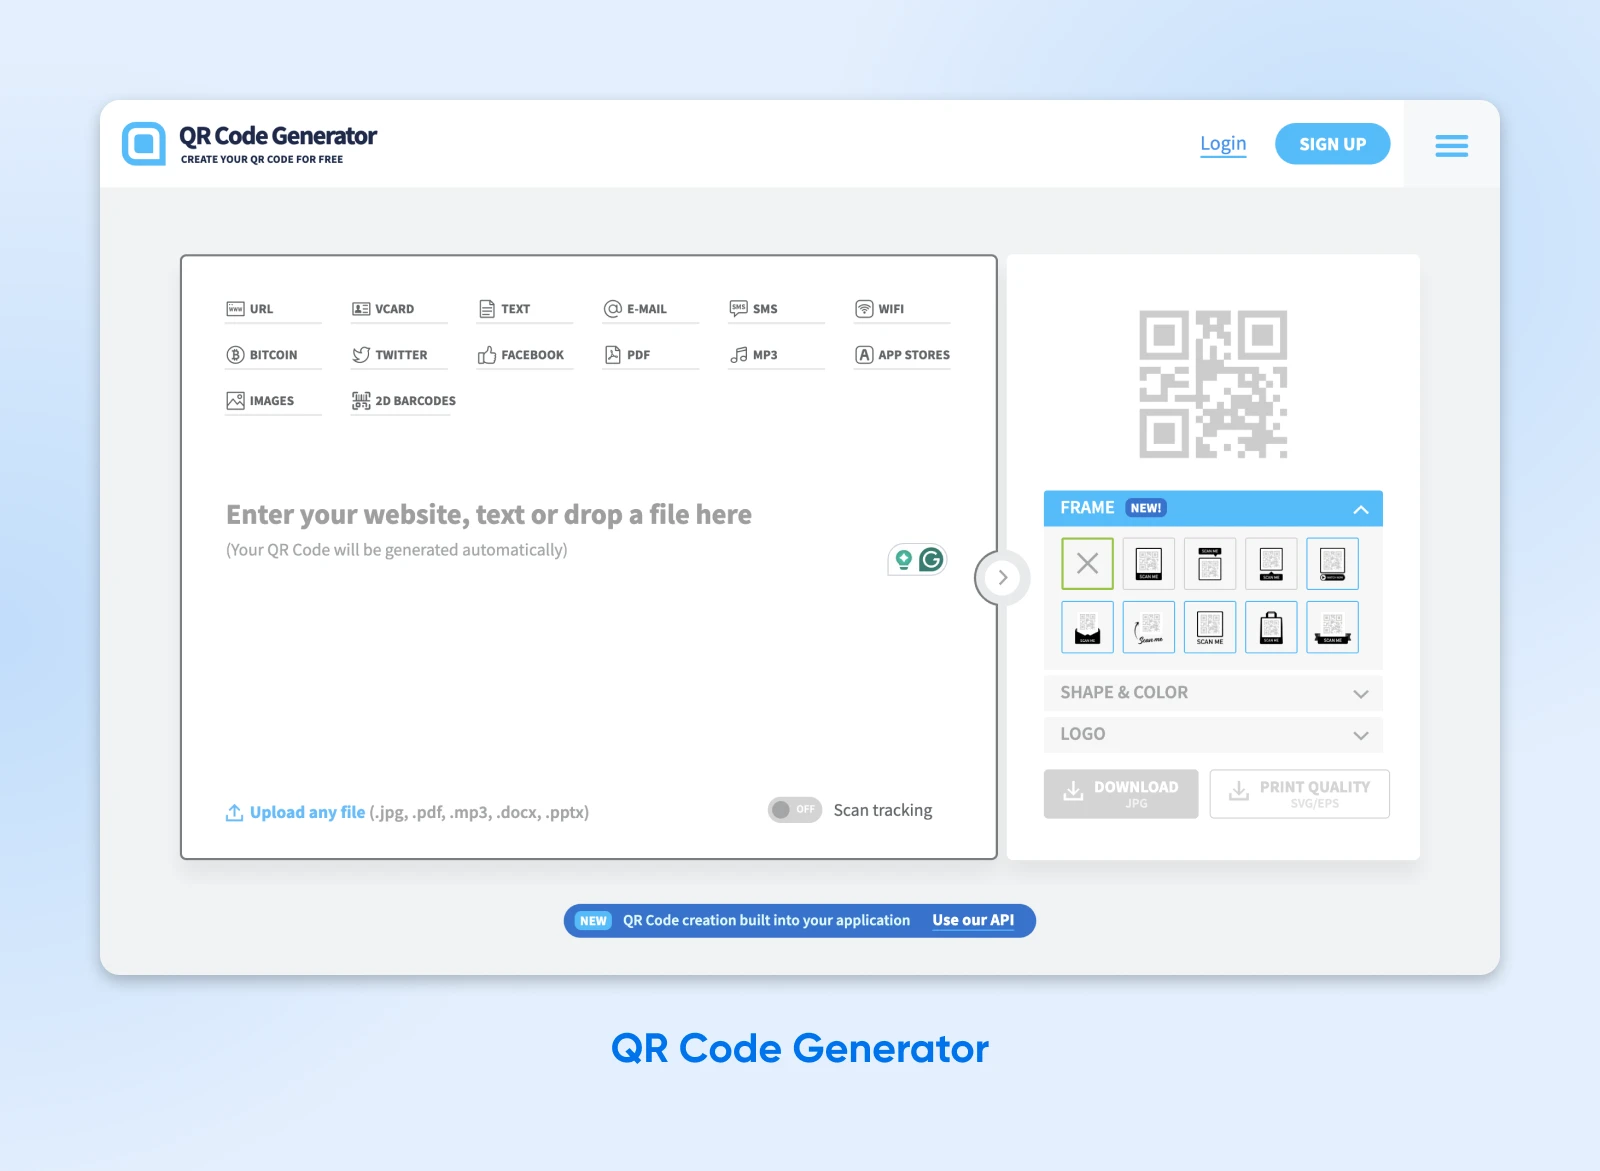 QR Code Generator's user interface prompts you to enter your website or text or drop a file to begin